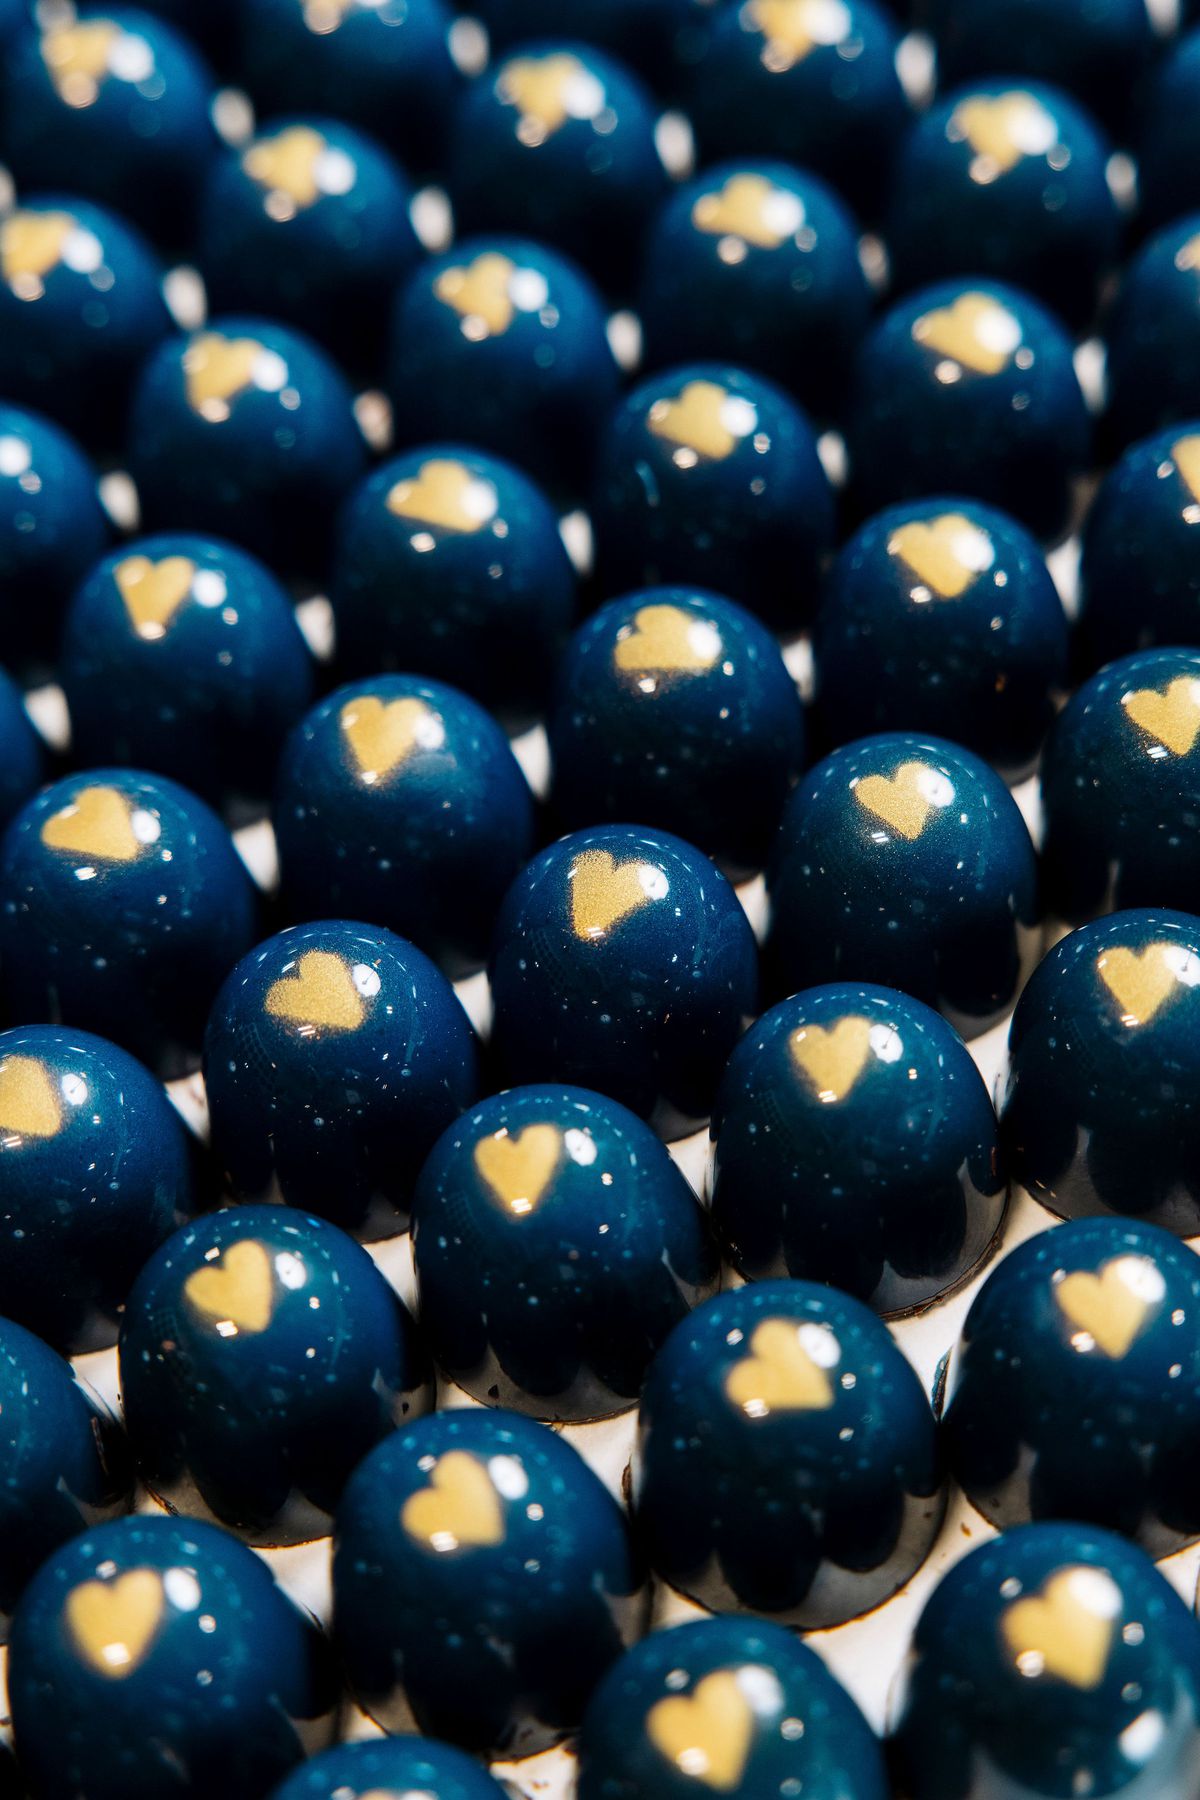 Rows of blue bonbons with a yellow heart in the middle.